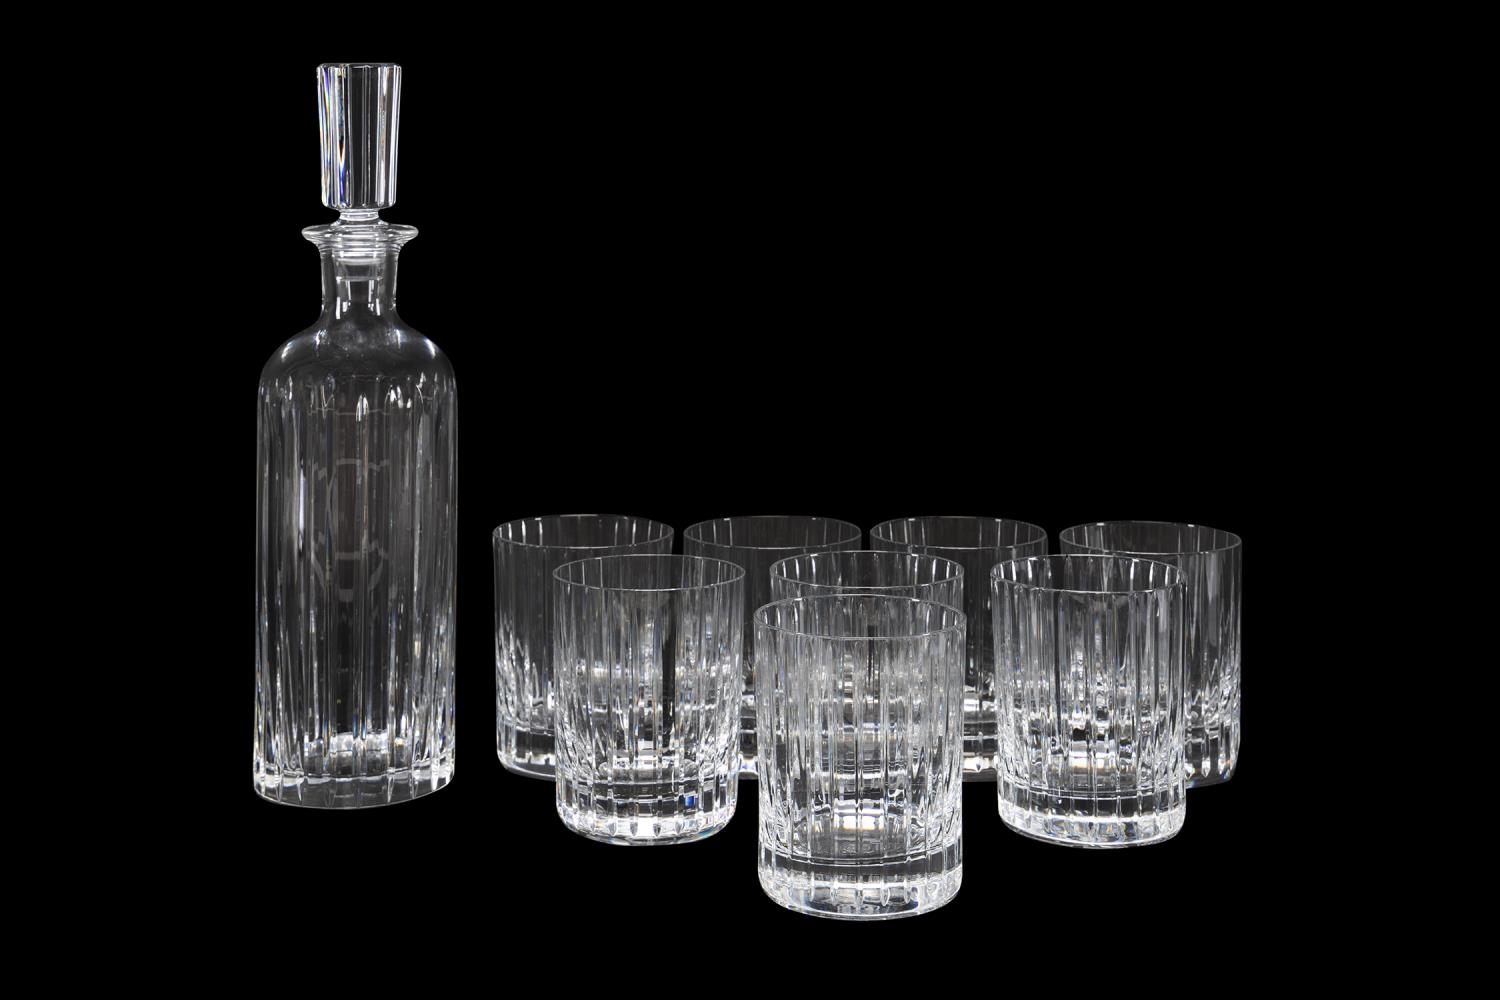 BACCARAT HARMONY DECANTER 8 2bff4d